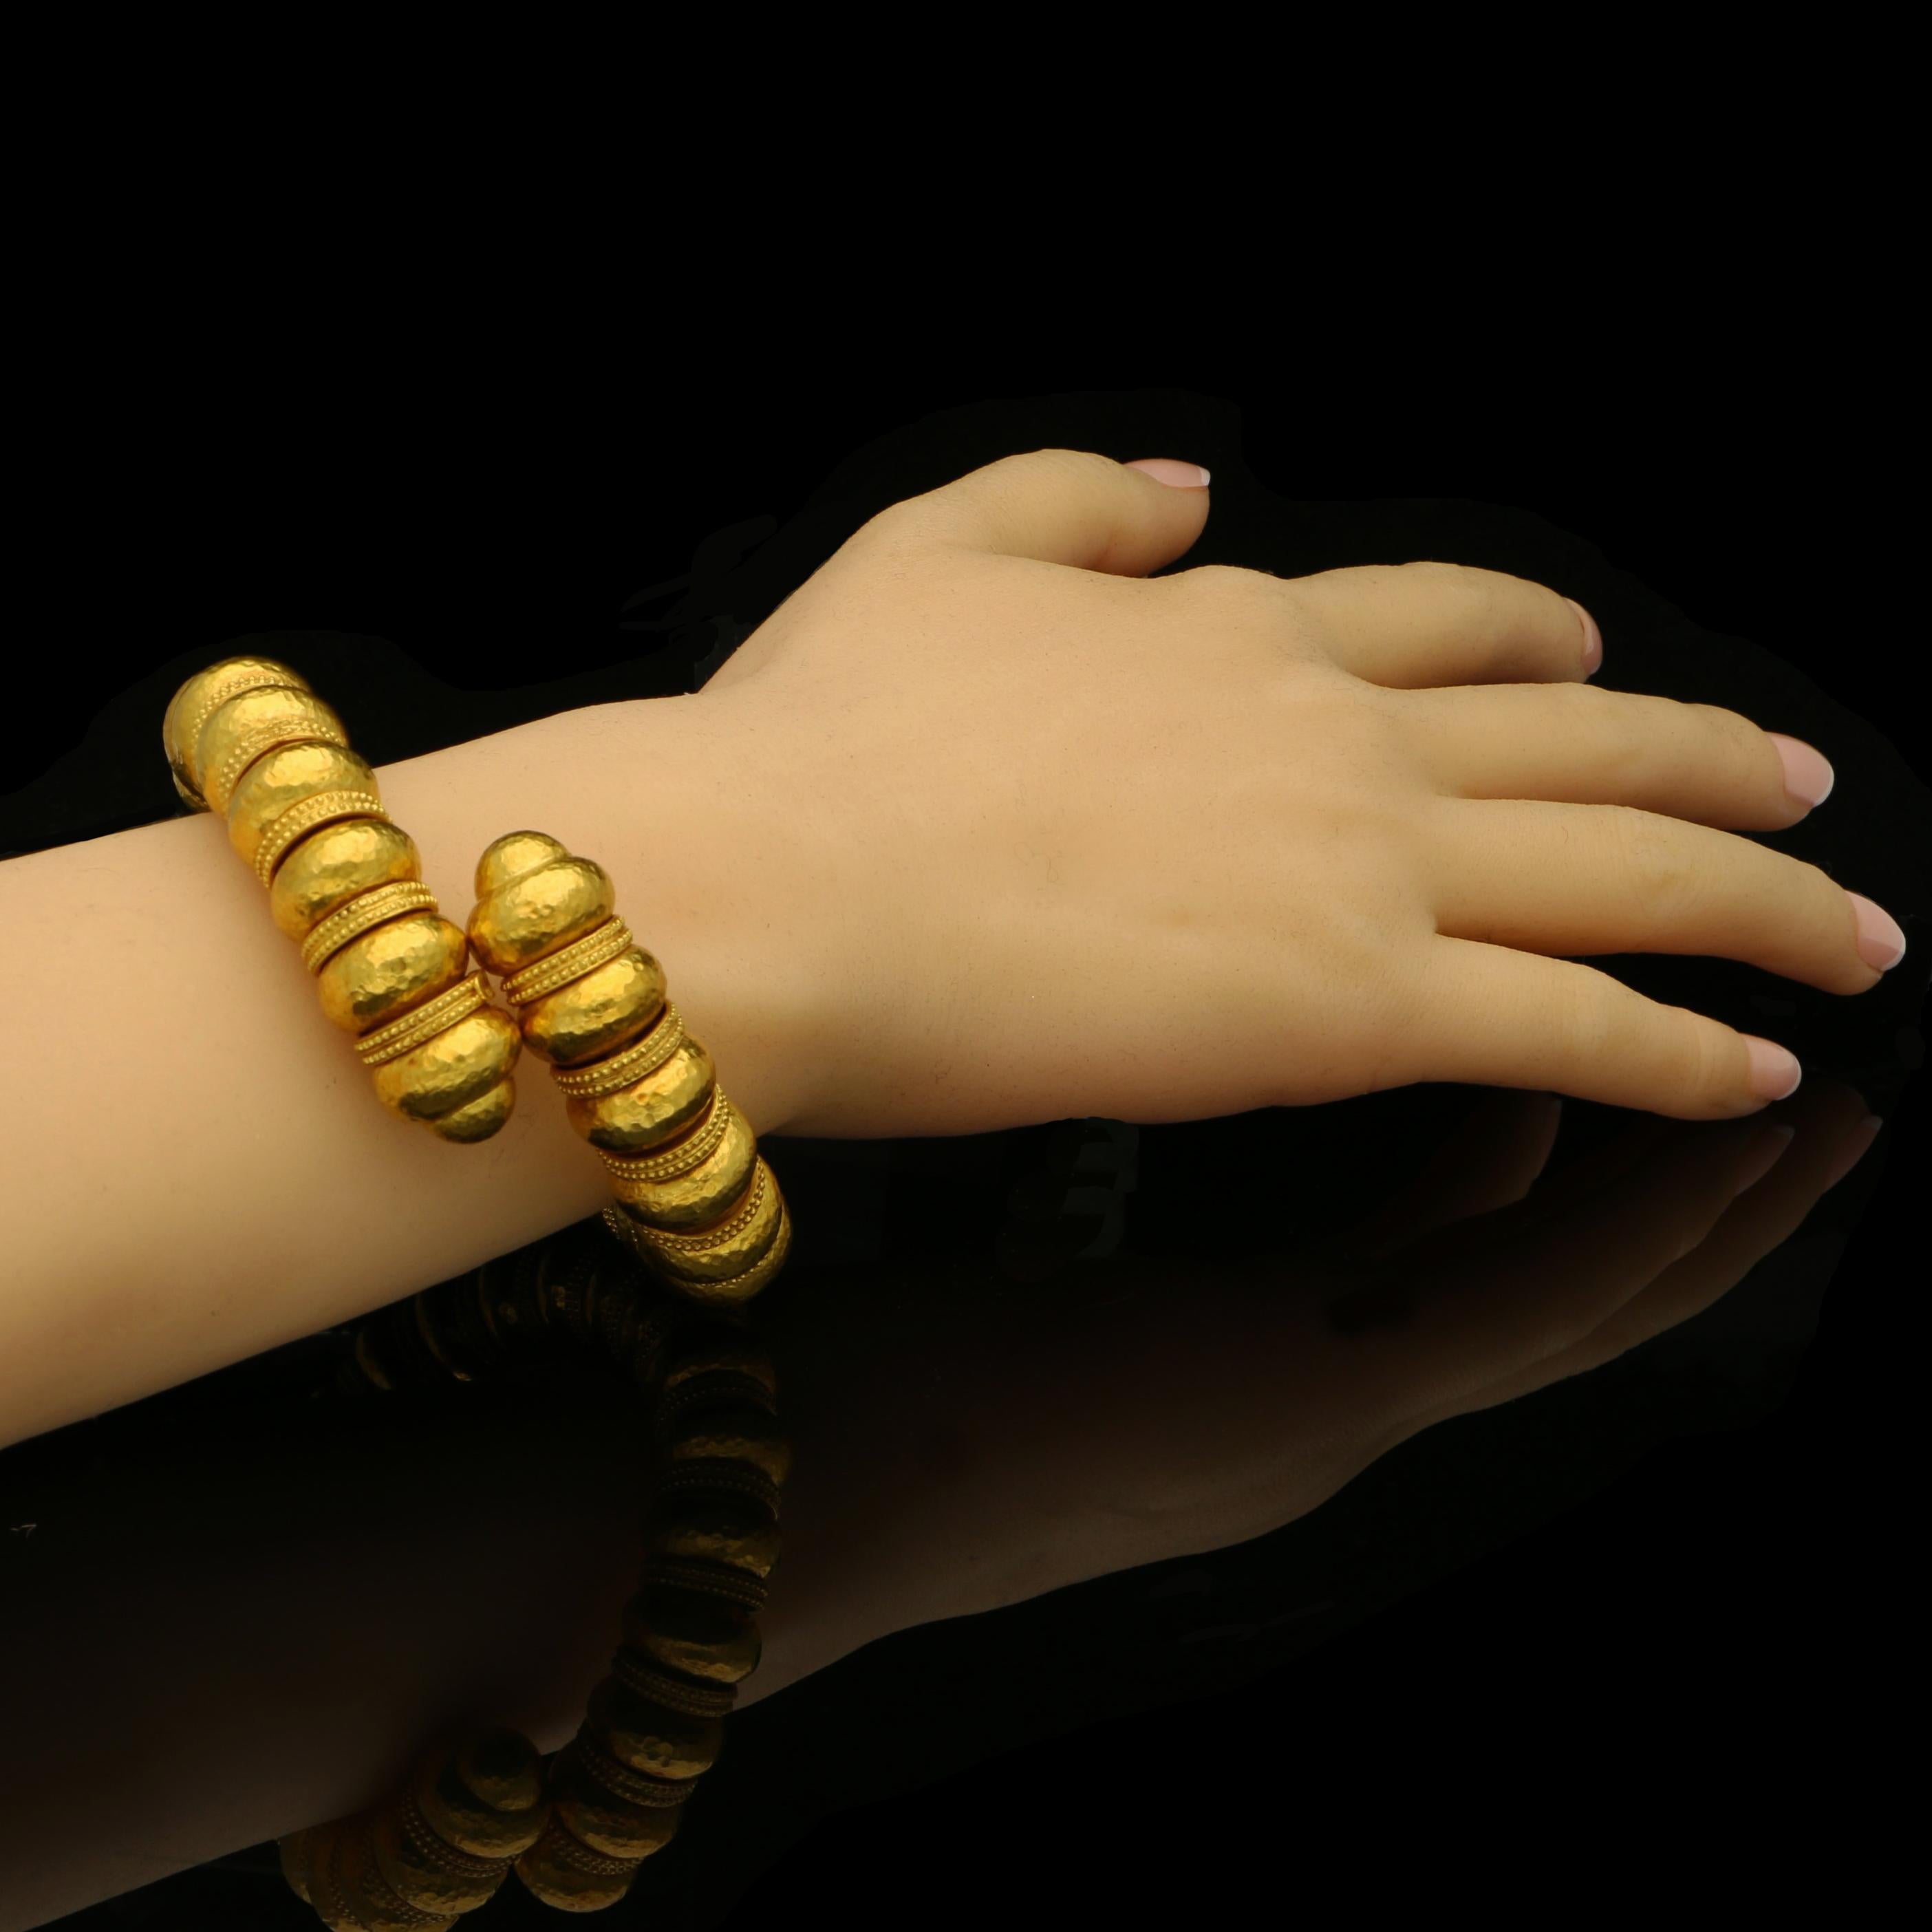 22ct yellow gold signed Ilias Lalaounis and with maker’s mark and K22
Inside wrist circumference 6.5”
129 grams

A stylish gold bead bracelet from the Minoan and Mycenaean collection by Ilias Lalaounis c.1970s, the open sprung bracelet designed as a